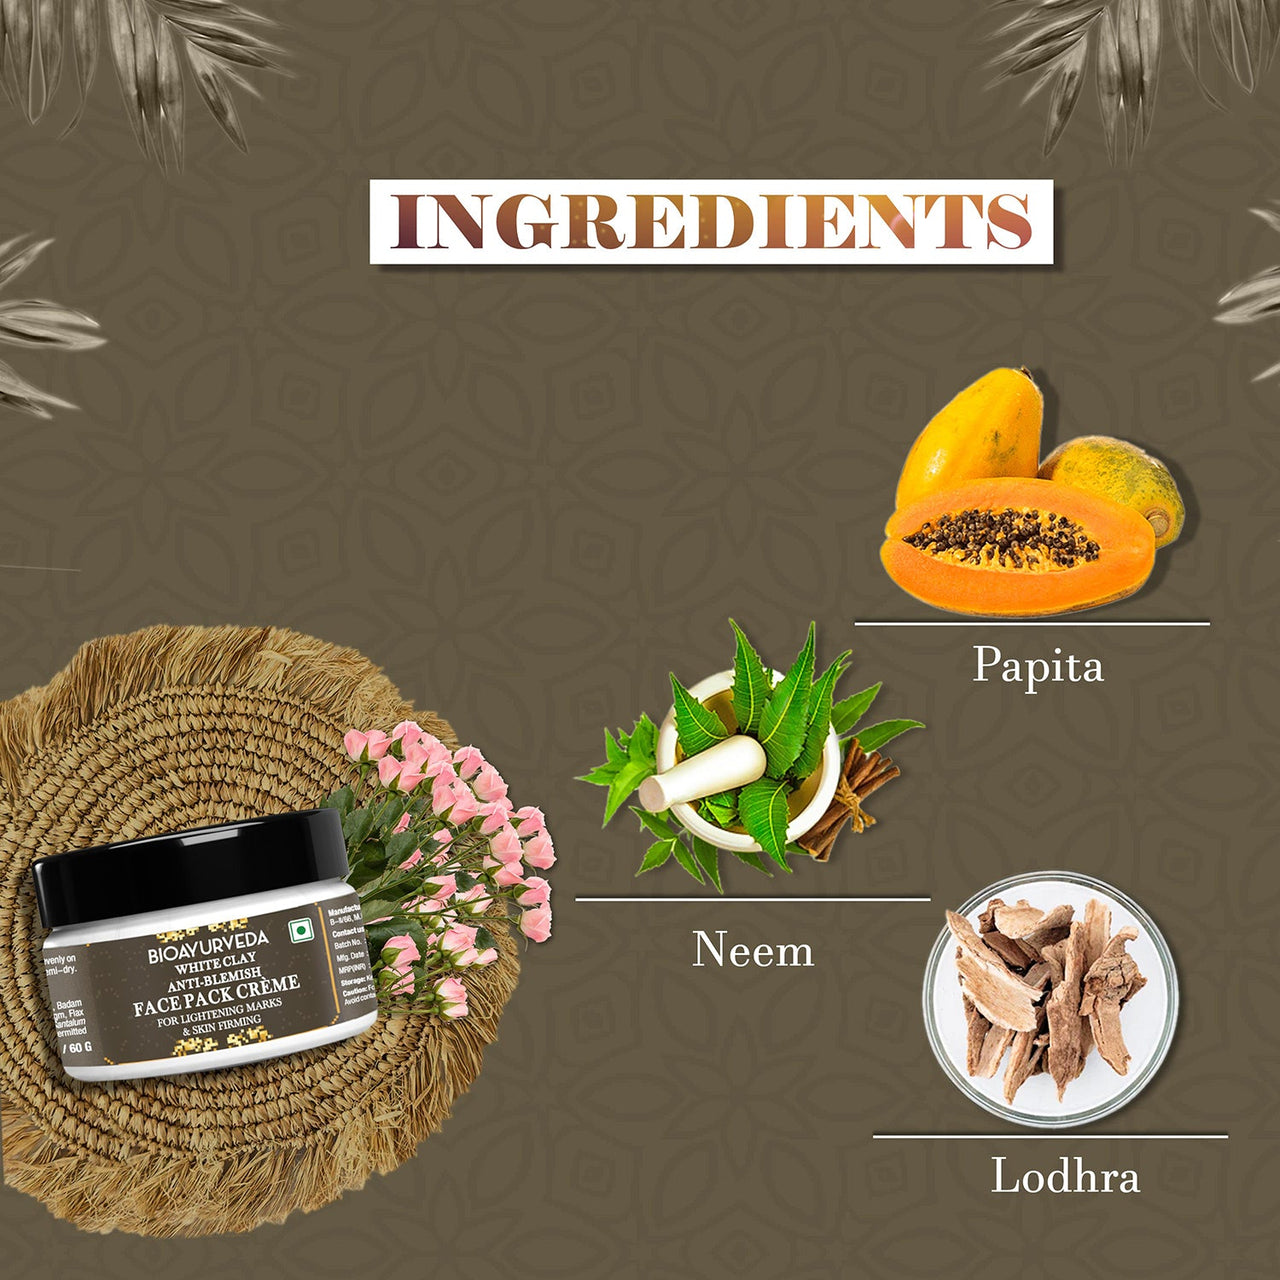 White Clay Anti Blemish Face Pack Cream Ingredients